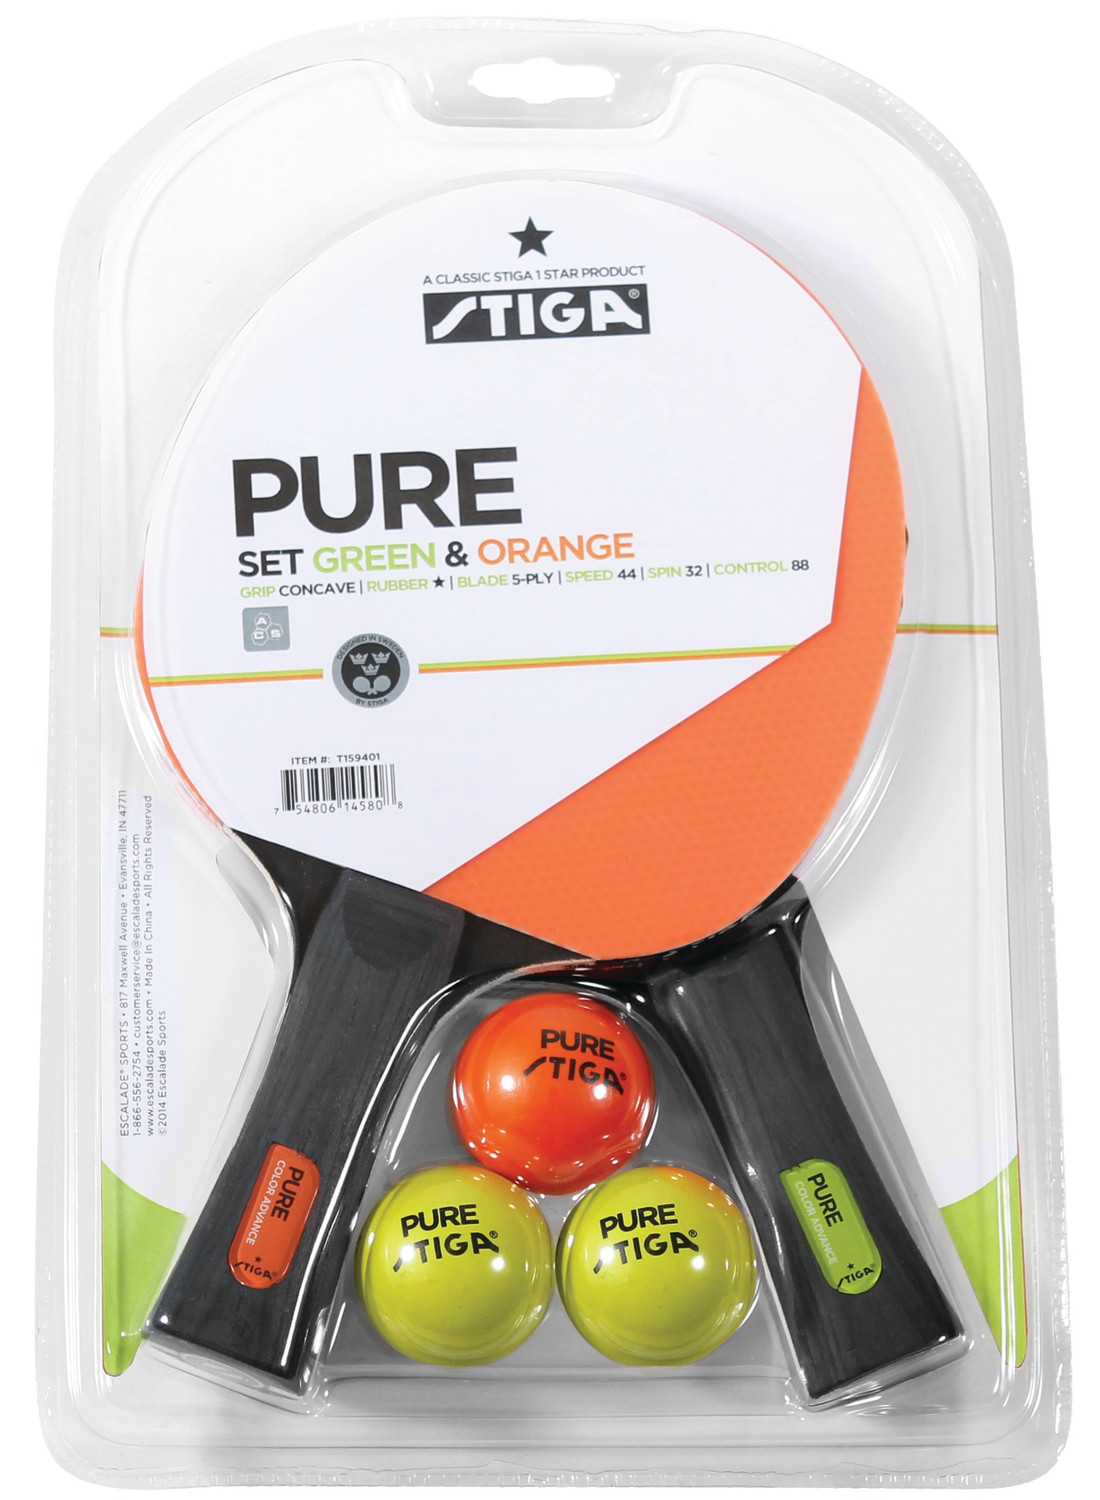 STIGA Pure Color Advance 2-Player Set - Includes Two Rackets and Three Balls - image 2 of 9